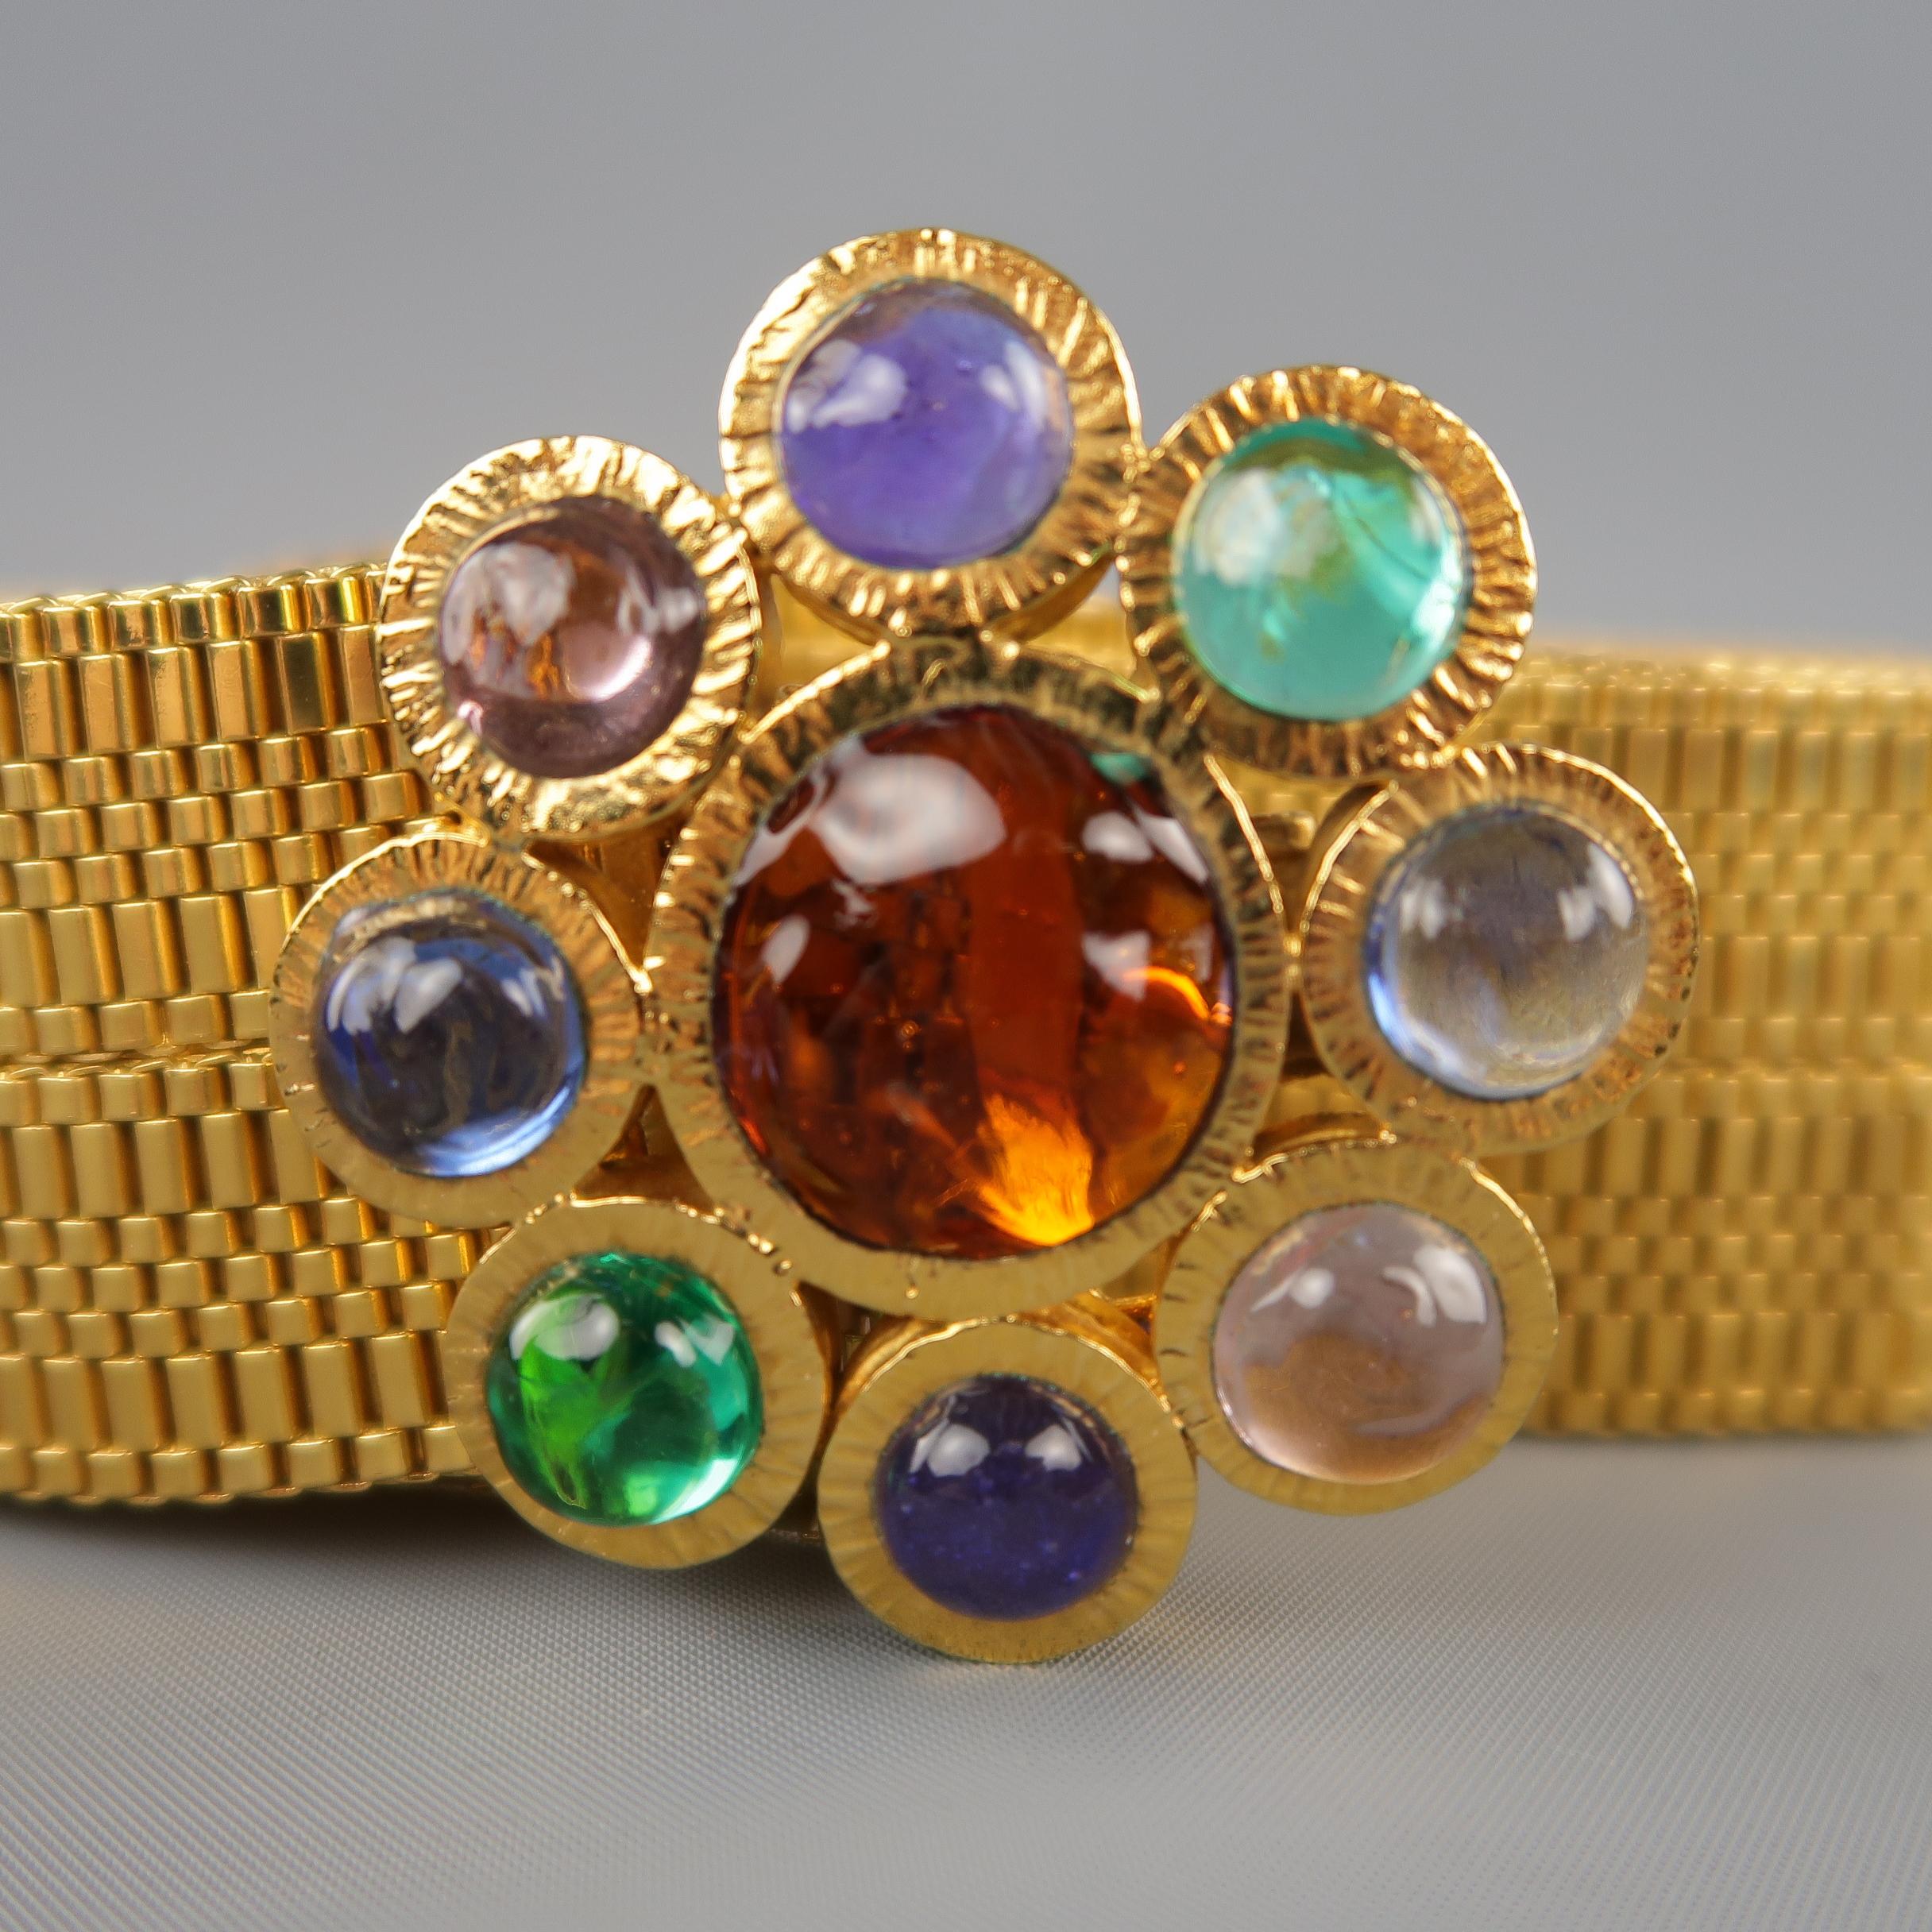 Vintage CHANEL from 1997 statement belt comes in gold tone metal with a metal woven strap and Gripoix Byzantine Flower adorned with green, purple, pink, blue, and amber stones. Made in France.
 
Excellent Pre-Owned Condition.
Marked: A '96
 
Length: